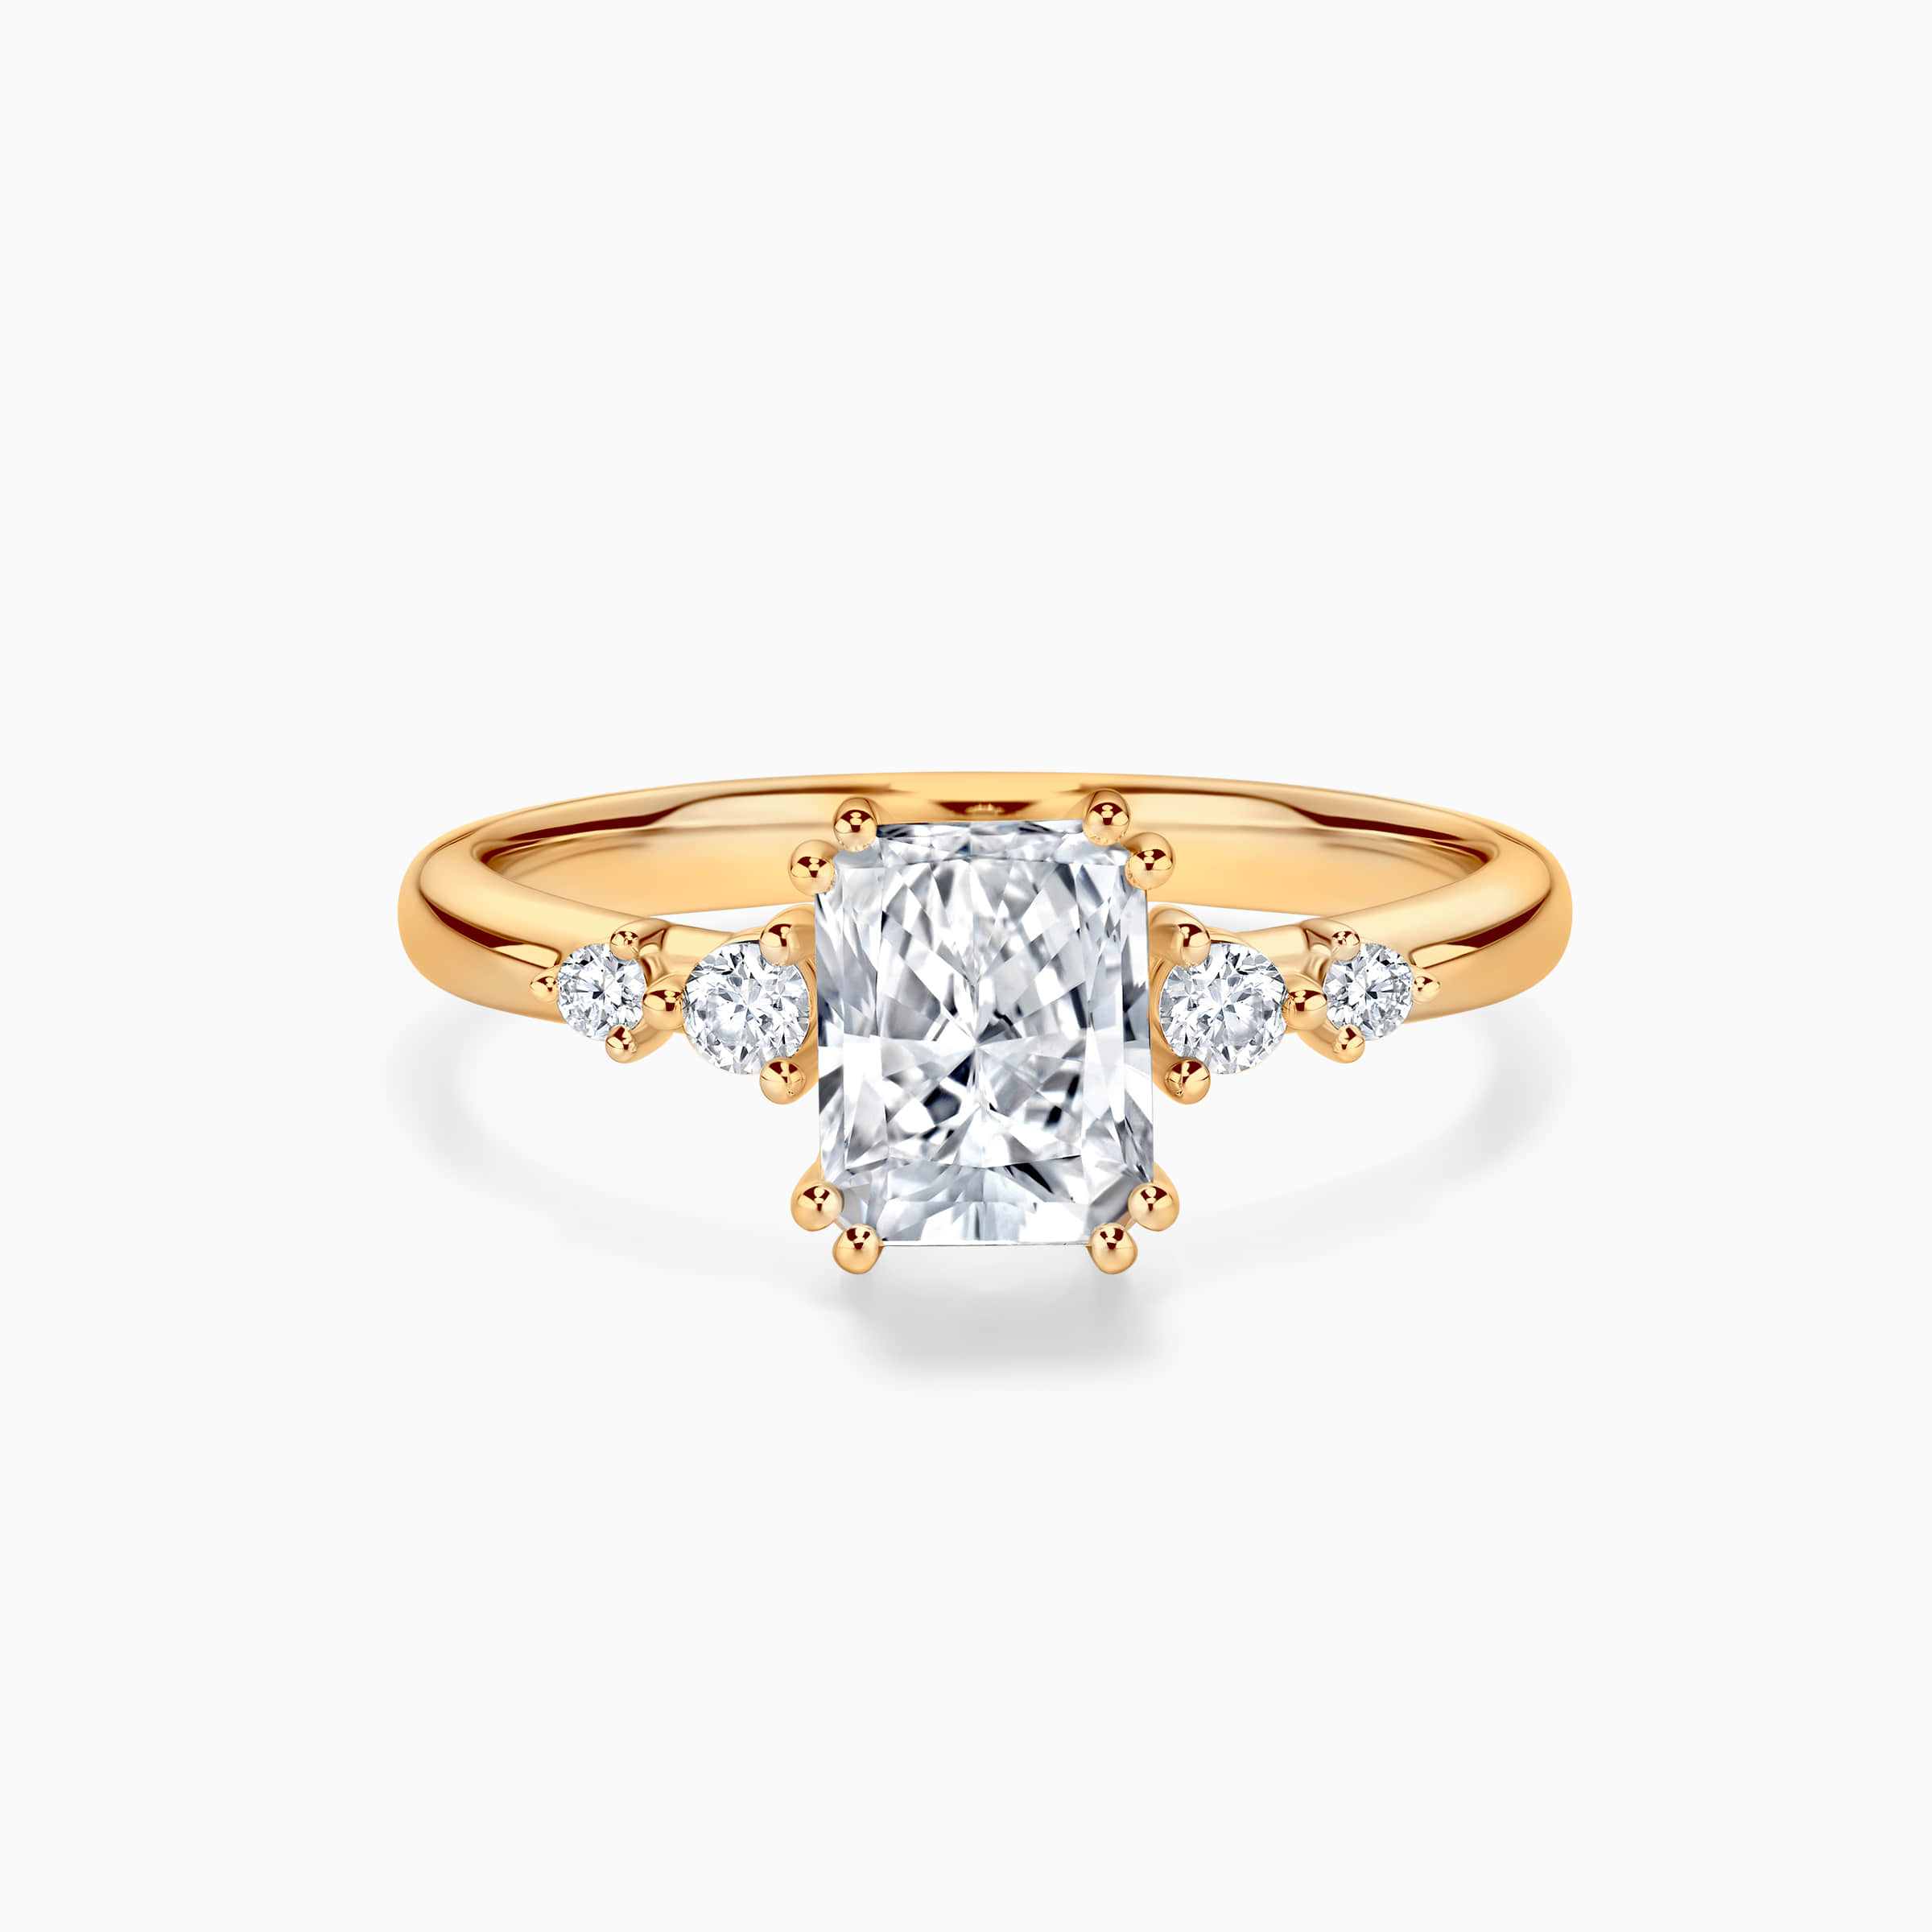 Darry Ring radiant cut engagement ring in yellow gold